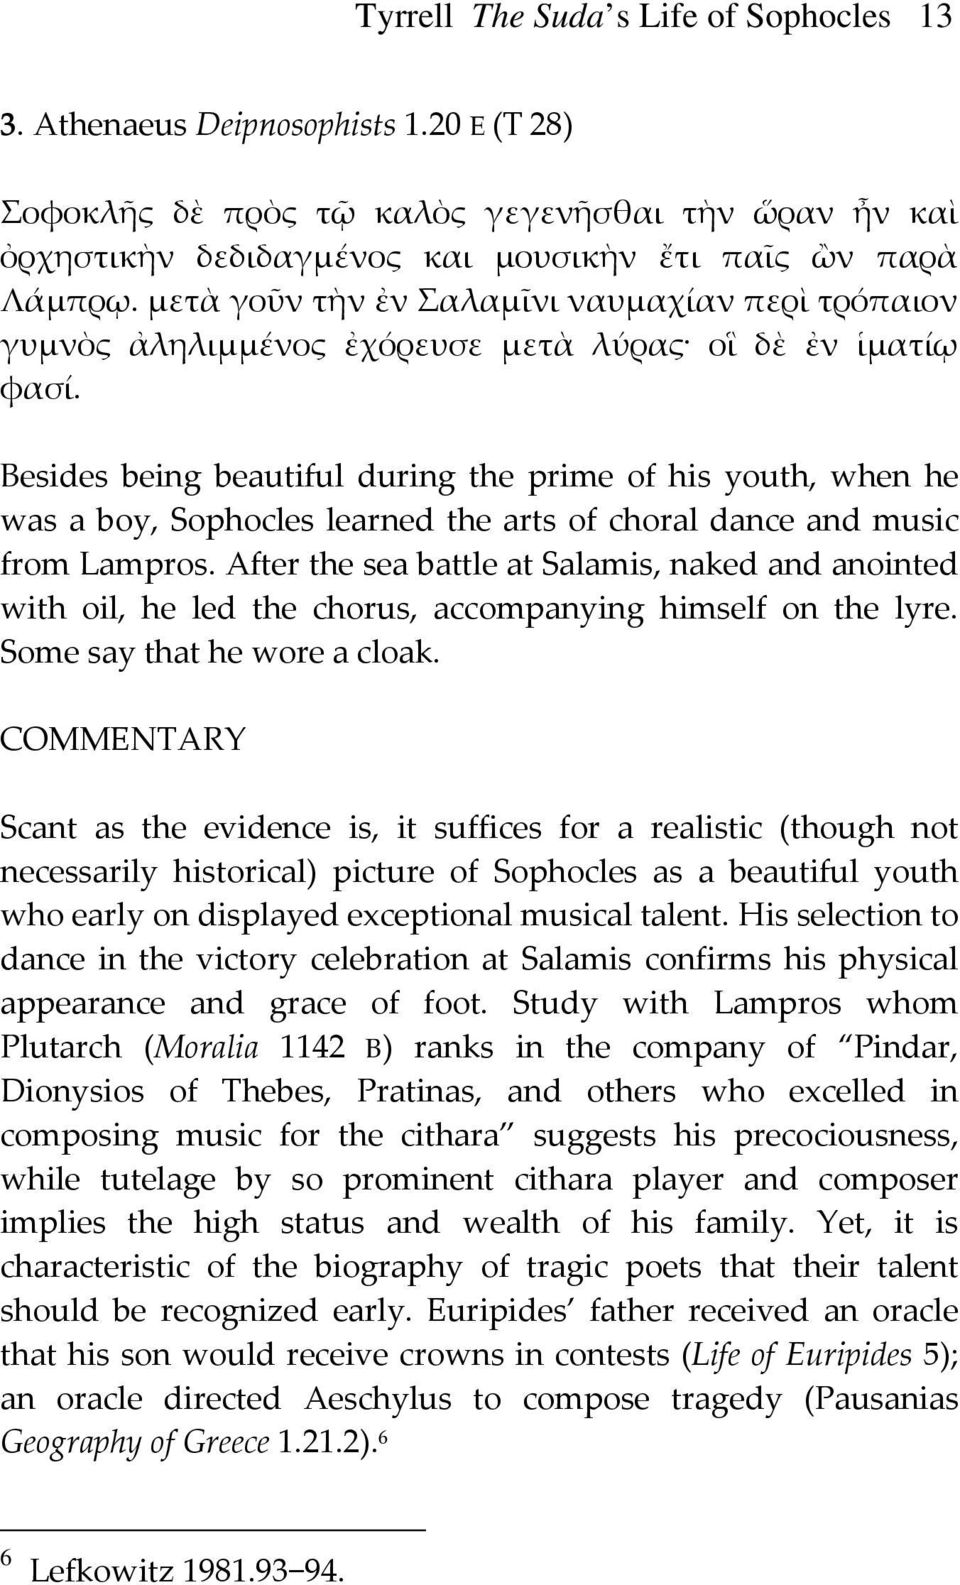 Besides being beautiful during the prime of his youth, when he was a boy, Sophocles learned the arts of choral dance and music from Lampros.